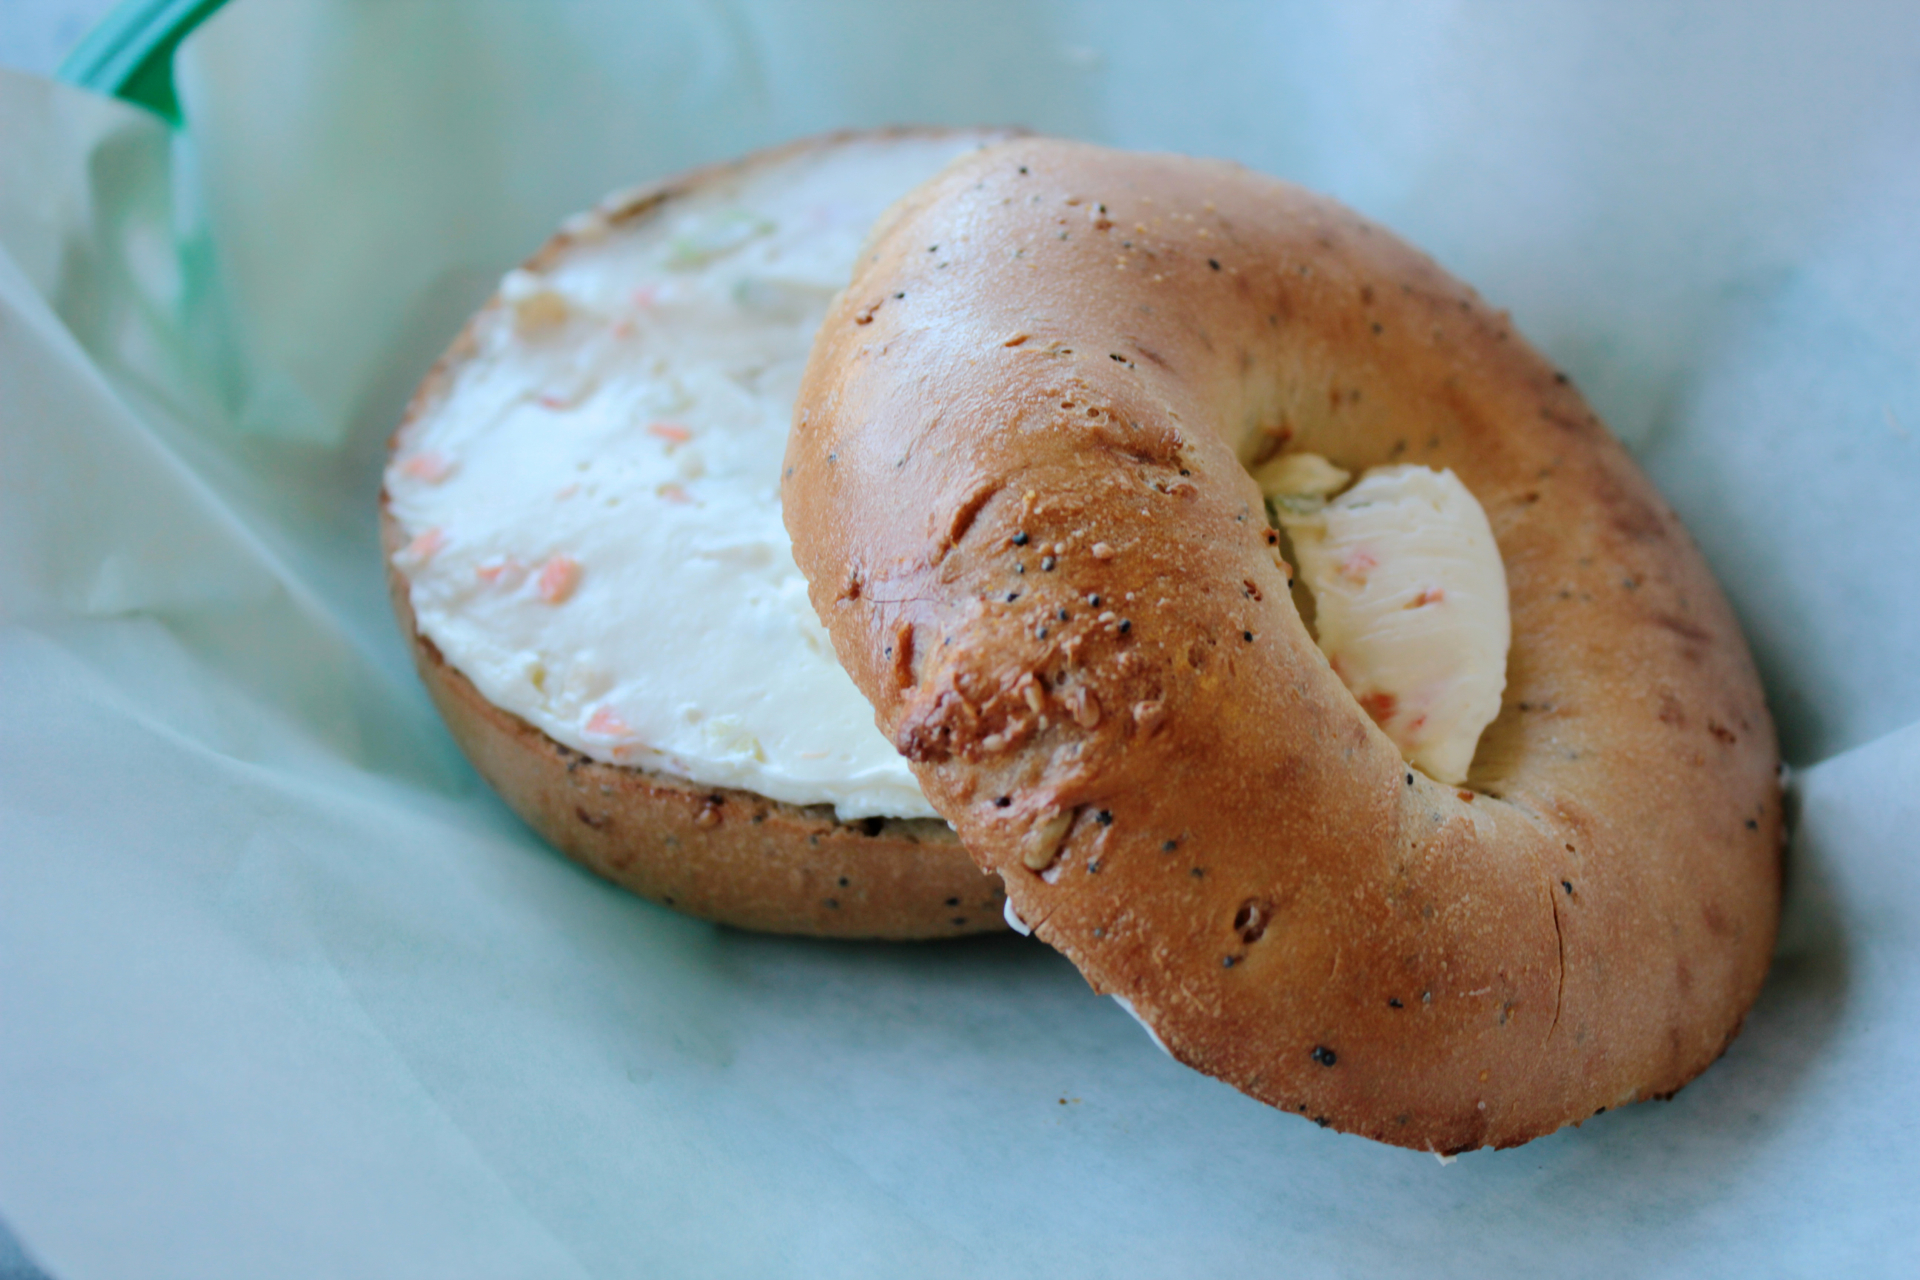 A tri-seed bagel with garden vegetable cream cheese at Saratoga Bagels.